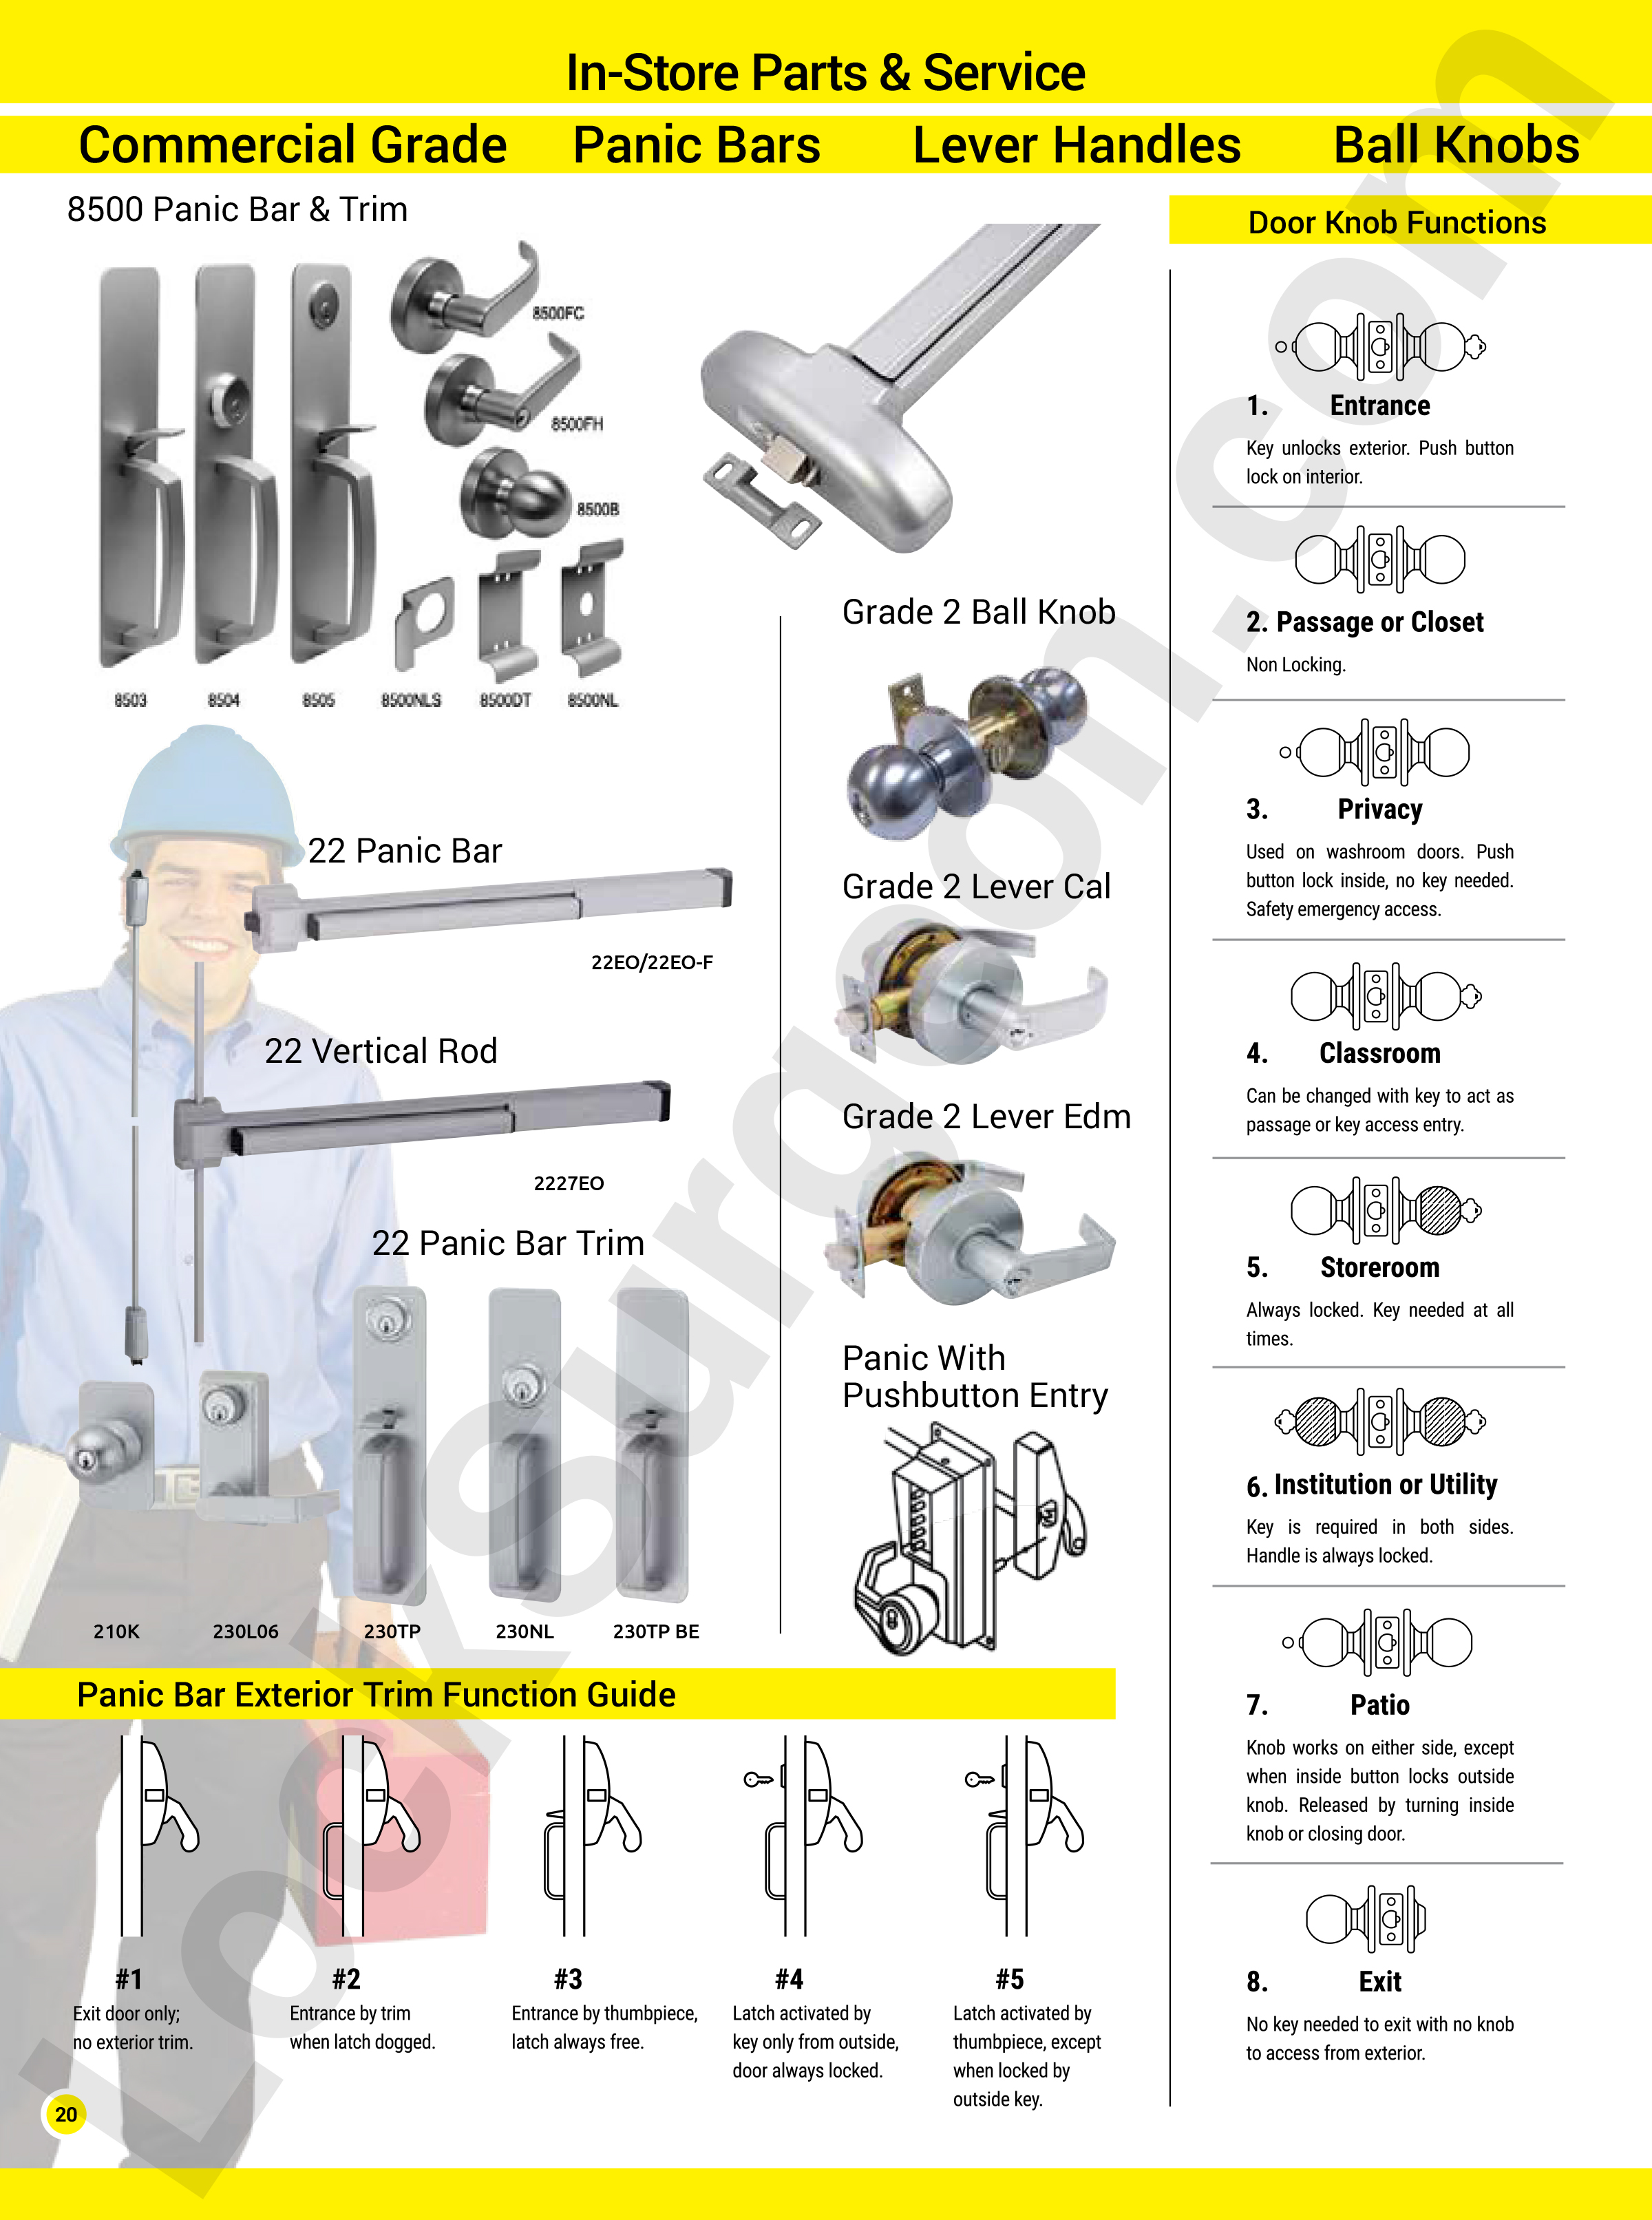 Lock Surgeon Edmonton South commercial grade panic bars lever handles ball knobs in-stock parts.